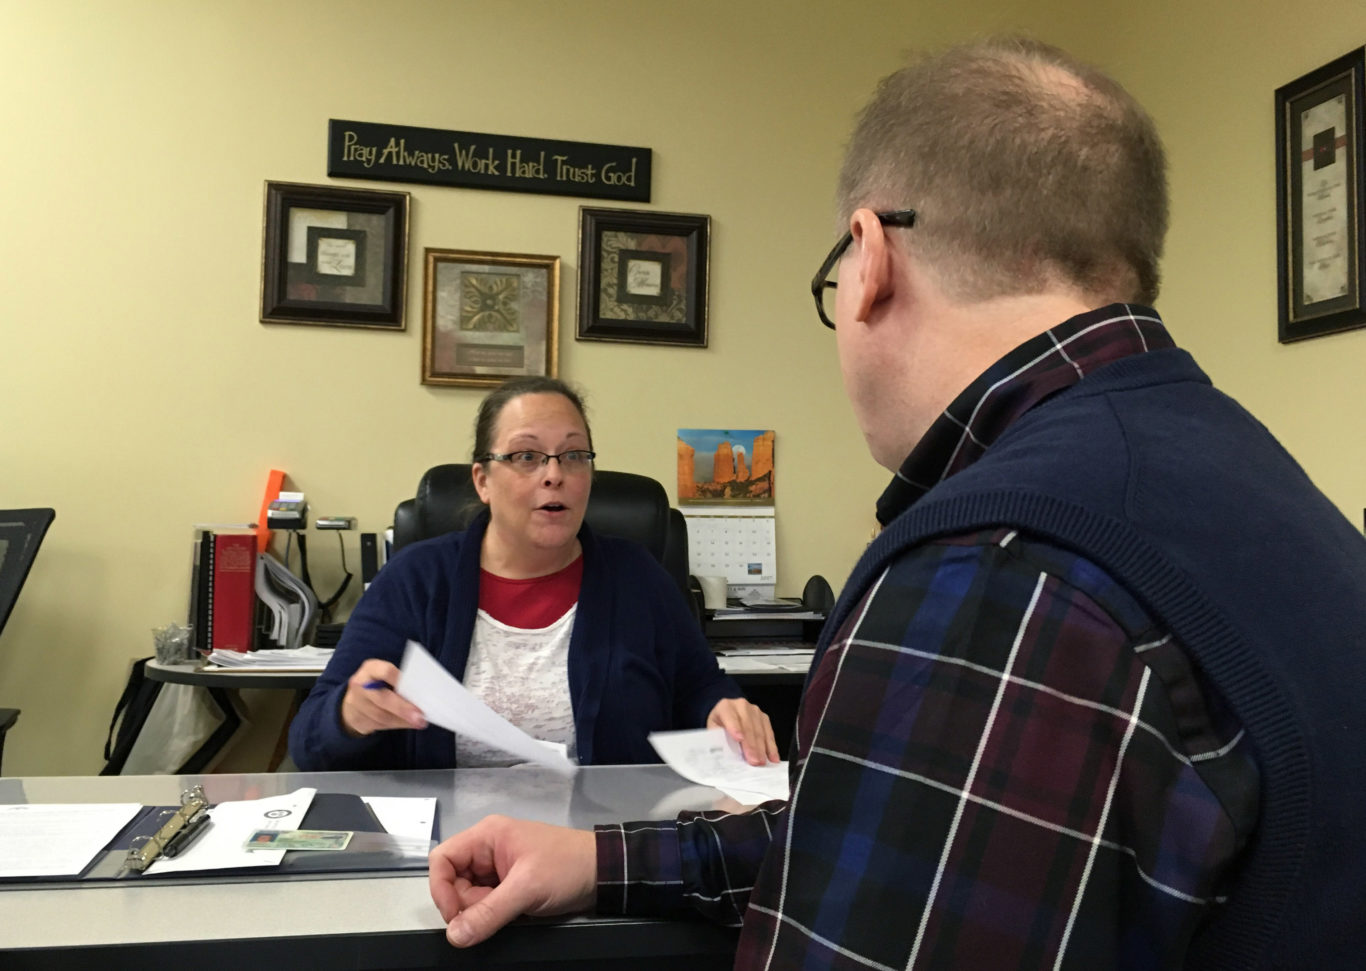 Kim Davis watched David Ermold file his candidacy for Rowan County clerk